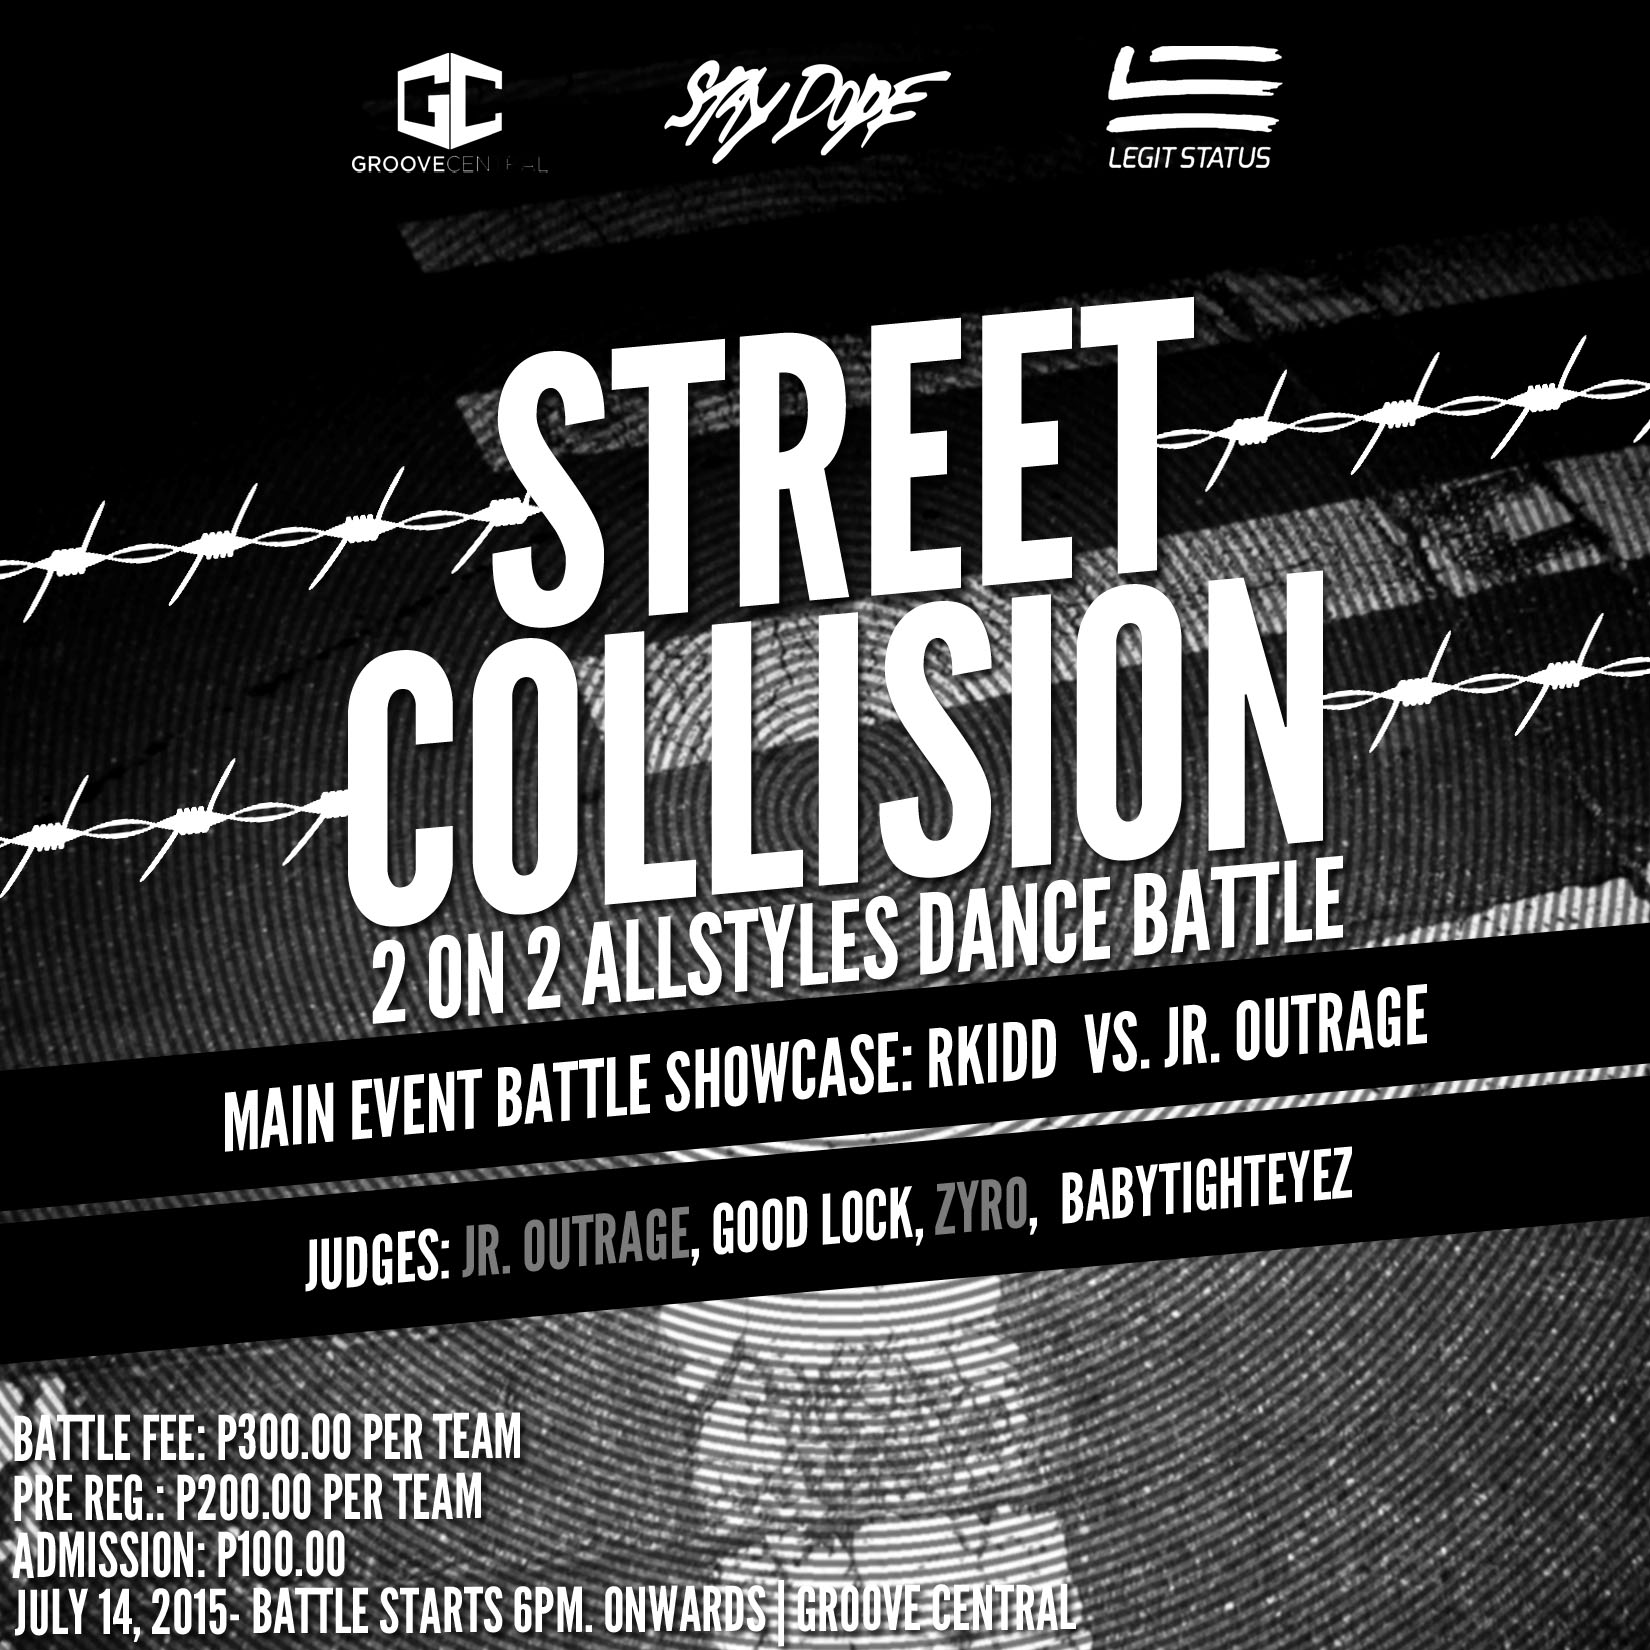 STREET COLLISION | 2 on 2 Allstyles Dance Battle     Tuesday, July 14     at 6:00pm     Next Week · 85°F / 76°F Thunderstorm     	     Show Map     Groove Central Dance Studio     Quezon City, Philippines STREET COLLISION 14th of July 2015 | 6pm. onwards | Groove Central 2nd Floor KZONE Building EDSA Corner NPO Road Quezon City ***BATTLE SHOWCASE*** Renz Rkidd Clavio Villareal aka RKIDD (Philippines) reppin' (AO1/KRUMPINOY) VERSUS Archie Saquilabon aka JR. OUTRAGE (USA) reppin' (GRV/OUTRAGE) ***2 ON 2 ALLSTYLES BATTLE*** Walk in Registration: P300.00 PER TEAM Pre-registration: P200.00 PER TEAM Audience Fee: P100.00 Judges: James Eric Wong (Move Manila) Zyro Santos (Philippine Allstars) Archie Sakilla (Guest | GRV/Outrage) Sherwin BabyTighteyez Salonga (Guest | Beast/Street Kingdon) Champion gets: P2,000.00 Cash + Trophy + Merchandise from Stay Dope This event is brought to you by: STAY DOPE Clothing Legit Status In partnership with Groove Central Pre-registration process: Post your team name below with members name and city/location Ex. Stay Dope / Alabang -Renz -Archie ===================================== ***PRE-SELECTION*** 1 Minute Each Per Battler | 1 Round ***TOP 16*** 1 Minute Each Per Battler | 2 Rounds ***TOP 8*** 1 Minute Each Per Battler | 2 Rounds ***TOP 4*** 1 Minute Each Per Battler | 2 Rounds ***Finals*** 1 Minute Each Per Battler | 3 Rounds ==================================== REGISTRATION: 1. Twin Villains - Quezon City - Girl Beast Luck Lasam - Funky Luke 2. SWITCHEZ - Las Piñas/Laguna Switch aka BoiBdash Burst aka J Switch 3. Unidentified - Marikina City Kenn Santos Gerald Mina 4. Navigators / Las Piñas City Aljhun Esclito Luigi Flares 5. SANGEN / Quezon City Donald B. Orcullo Vincent Joey Japia 6. First Class' Iswurly Iskay / Quezon City Sky Swurl 7. Double Gigants - Antipolo/Bacoor Cavite John Samuel Lozano Villanueva Daniel Mendoza 8. G.M.Y ErIc Muñoz Delos Trinos / a.k.a NB Aian Trapani / a.k.a tiger